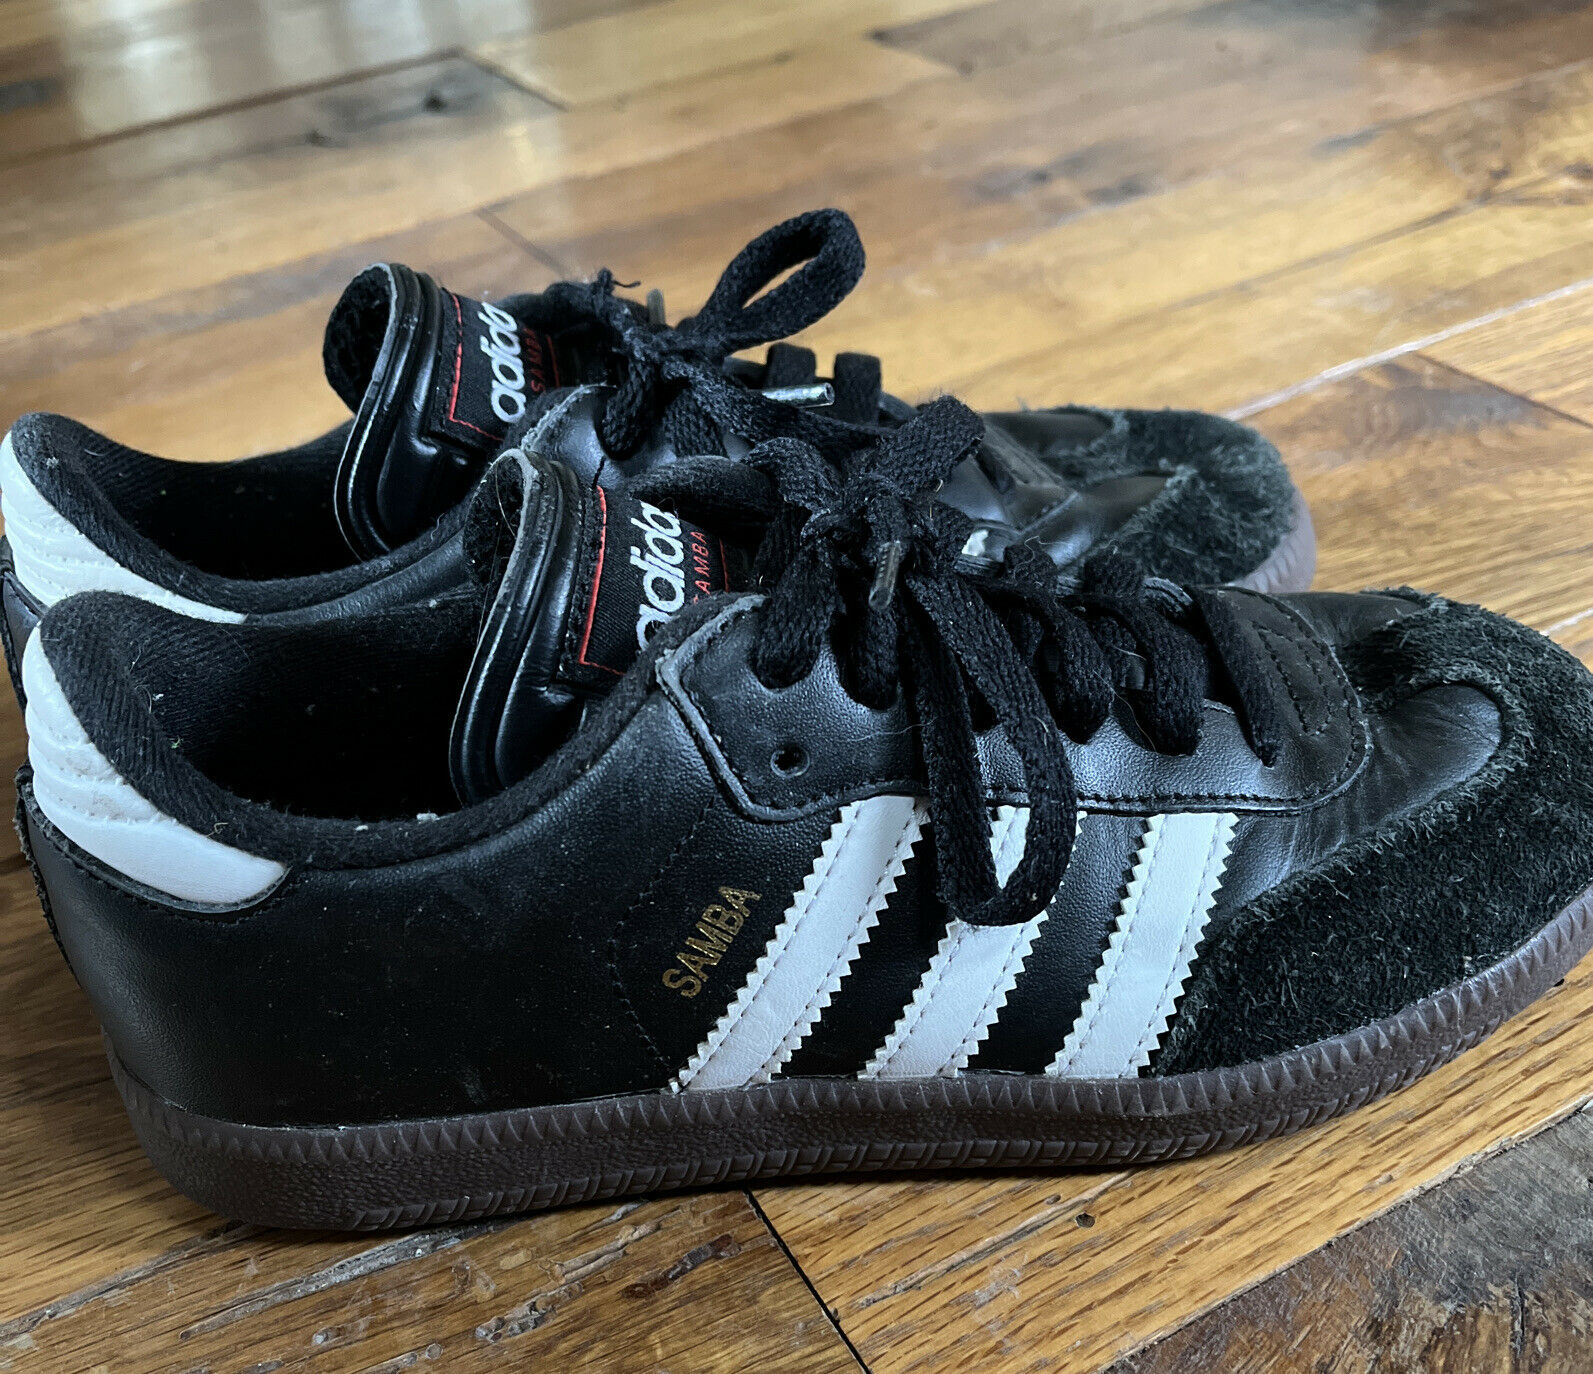 Adidas Samba Black White Sneakers Indoor Soccer shoes 036516 Youth Kids Size 3